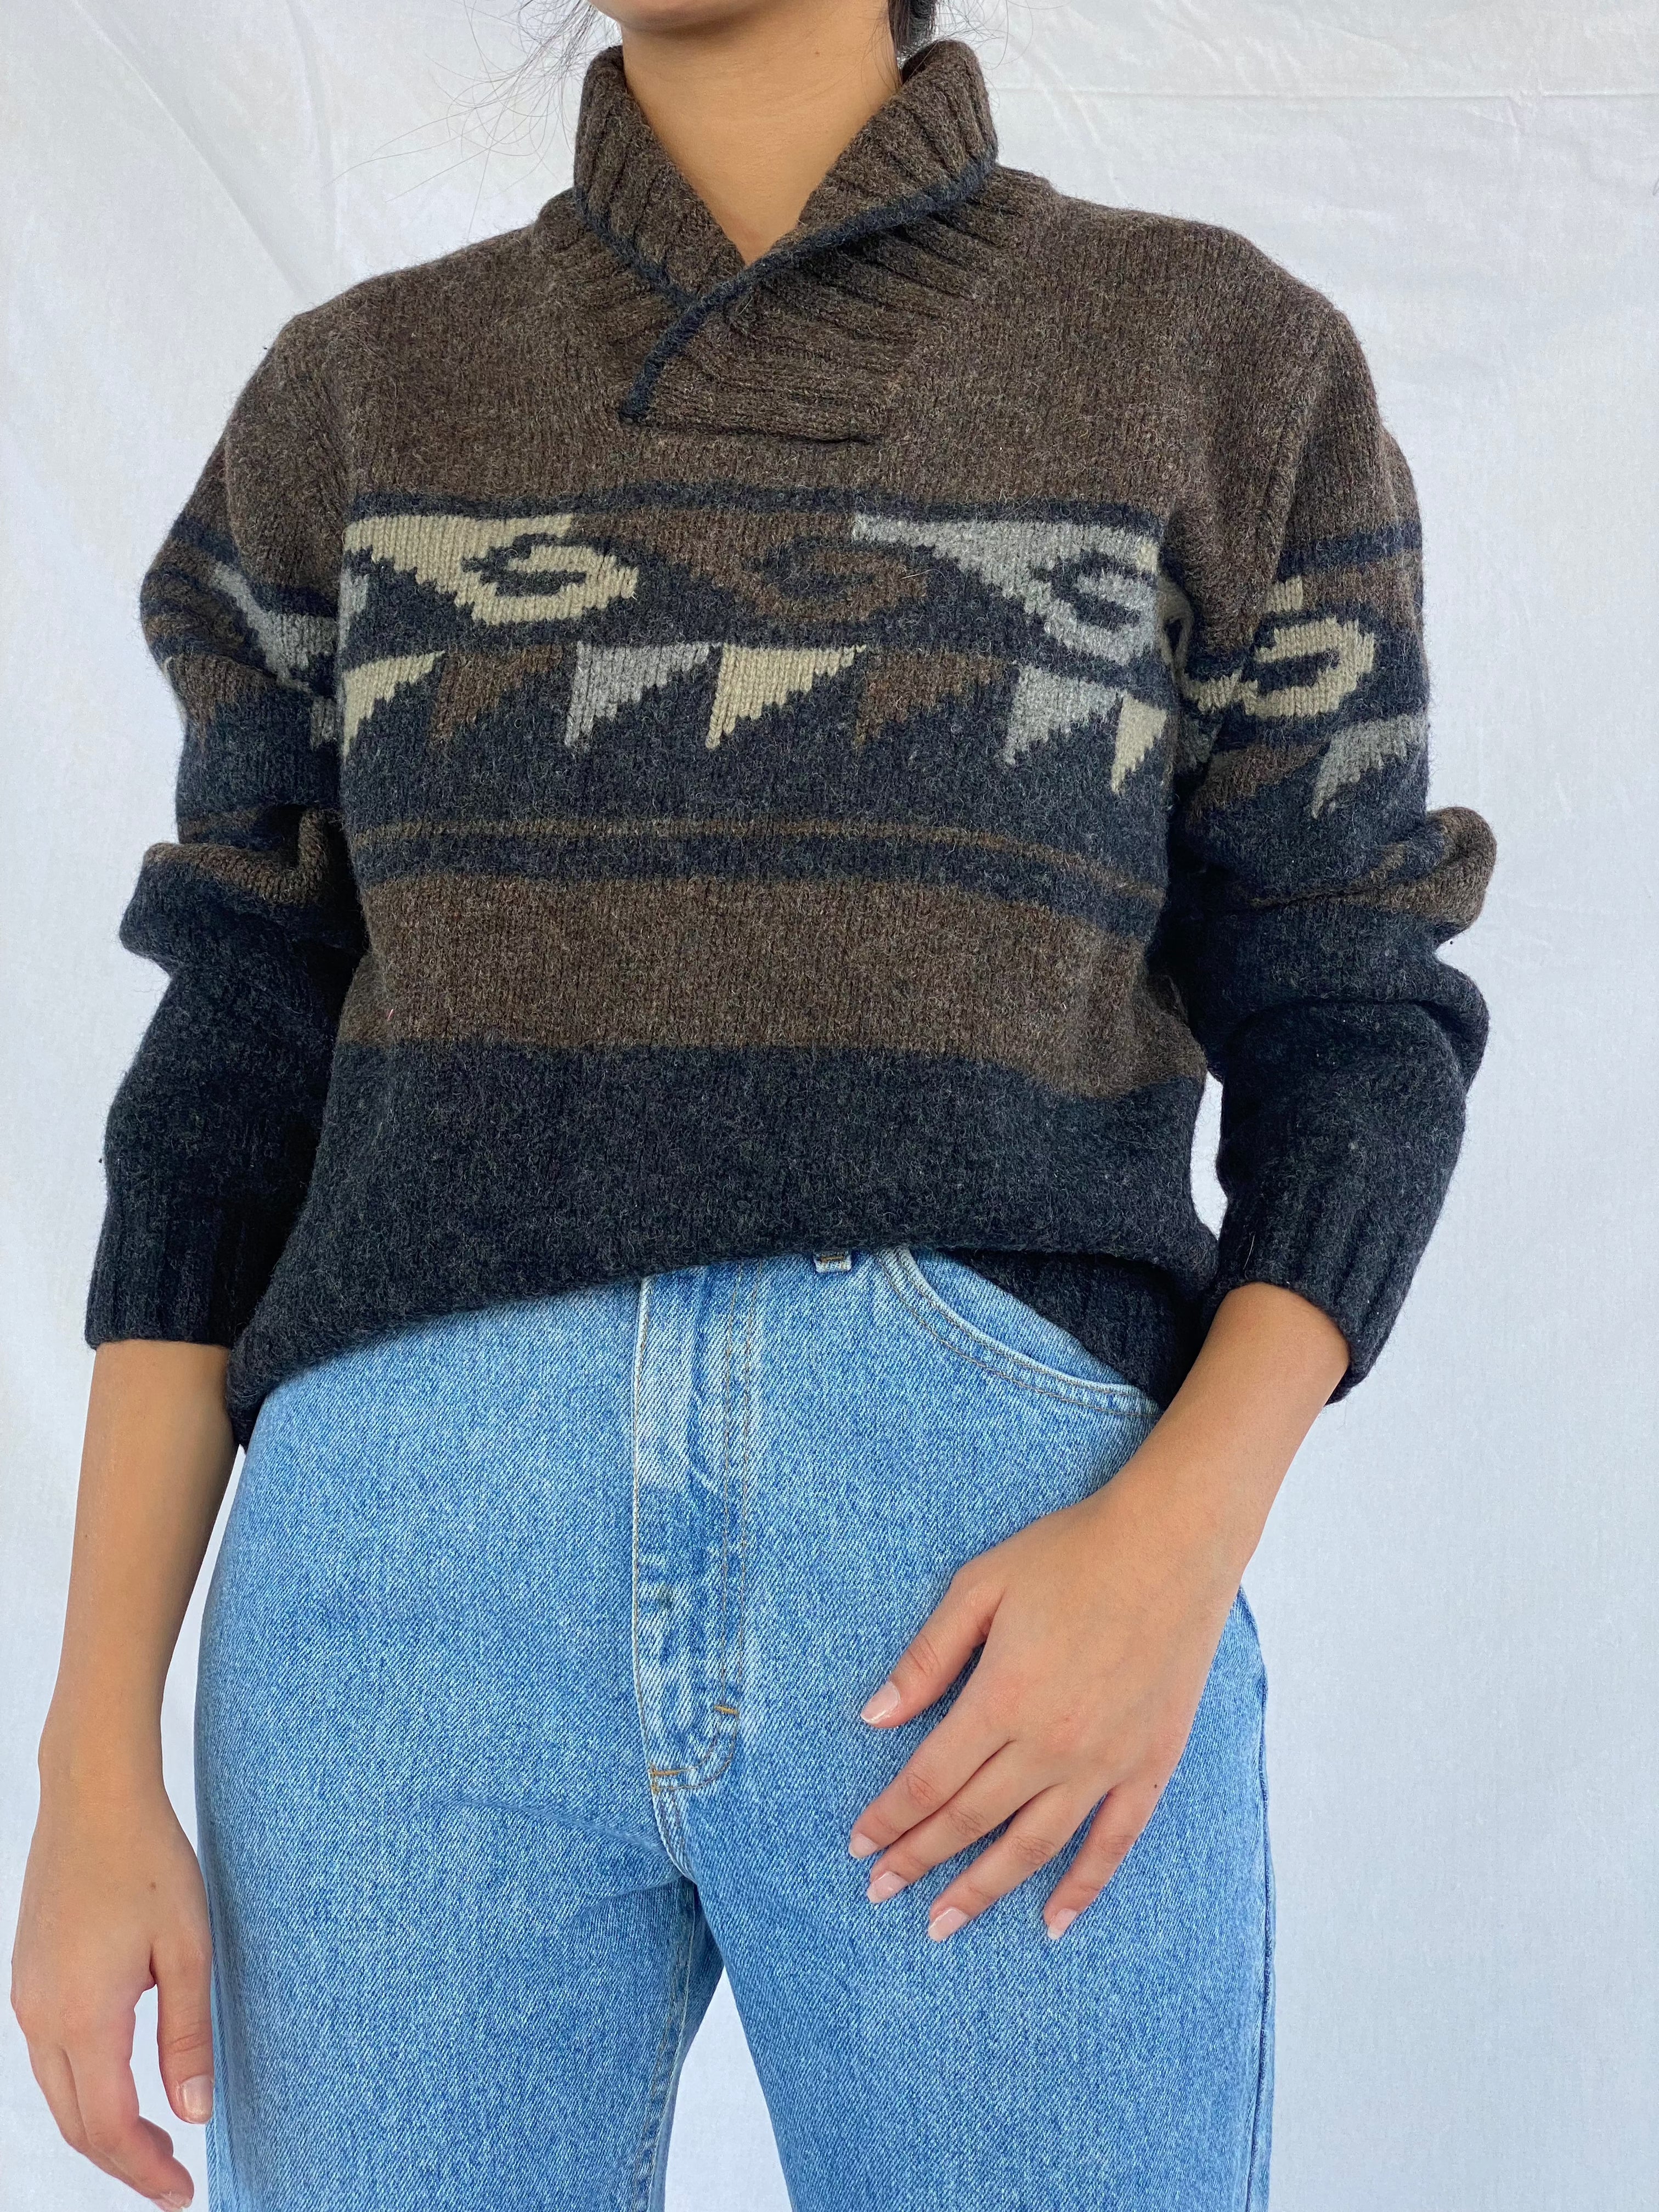 Vintage United Colors of Benetton Sweater - Balagan Vintage Sweater knitted sweater, oversized sweater, printed sweater, vintage sweater, winter